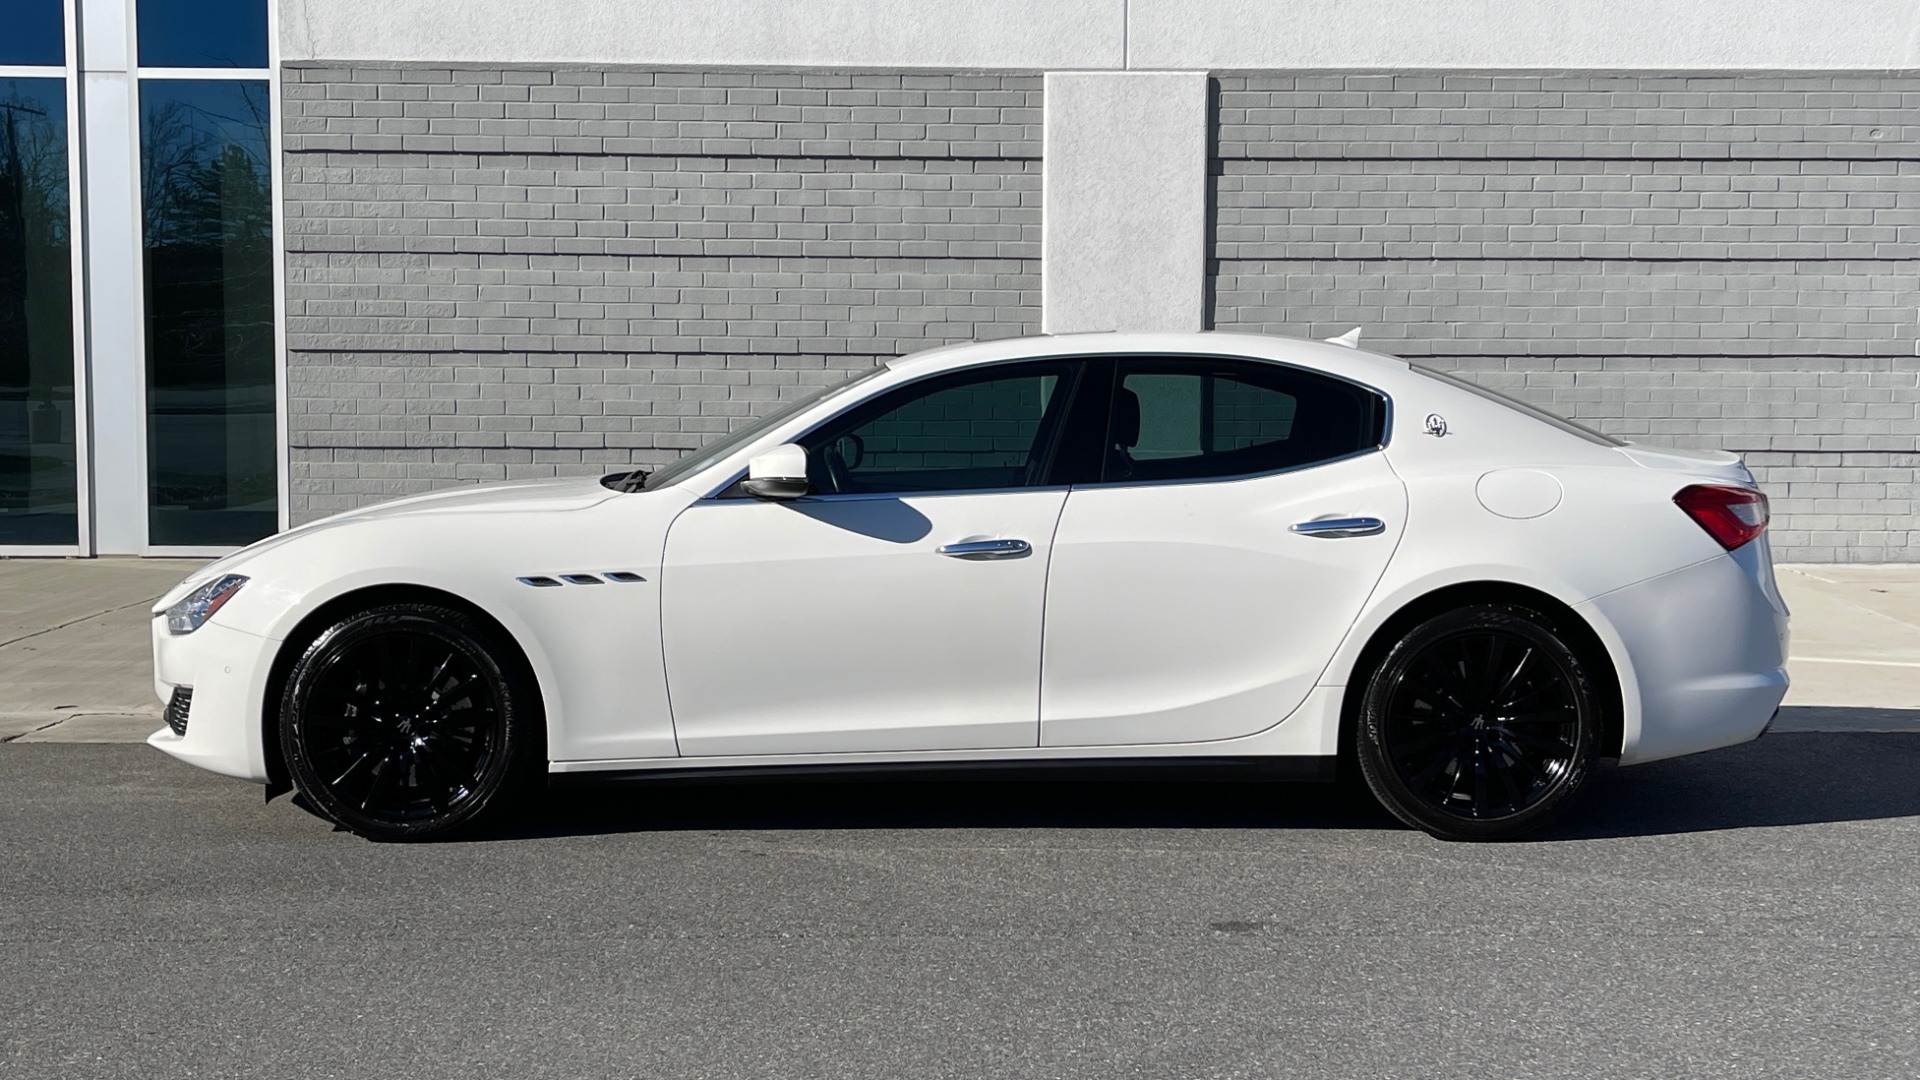 Used 2018 Maserati GHIBLI S Q4 3.0L SEDAN / AWD / NAV / SUNROOF / APPLE / HTD STS / REARVIEW for sale Sold at Formula Imports in Charlotte NC 28227 3